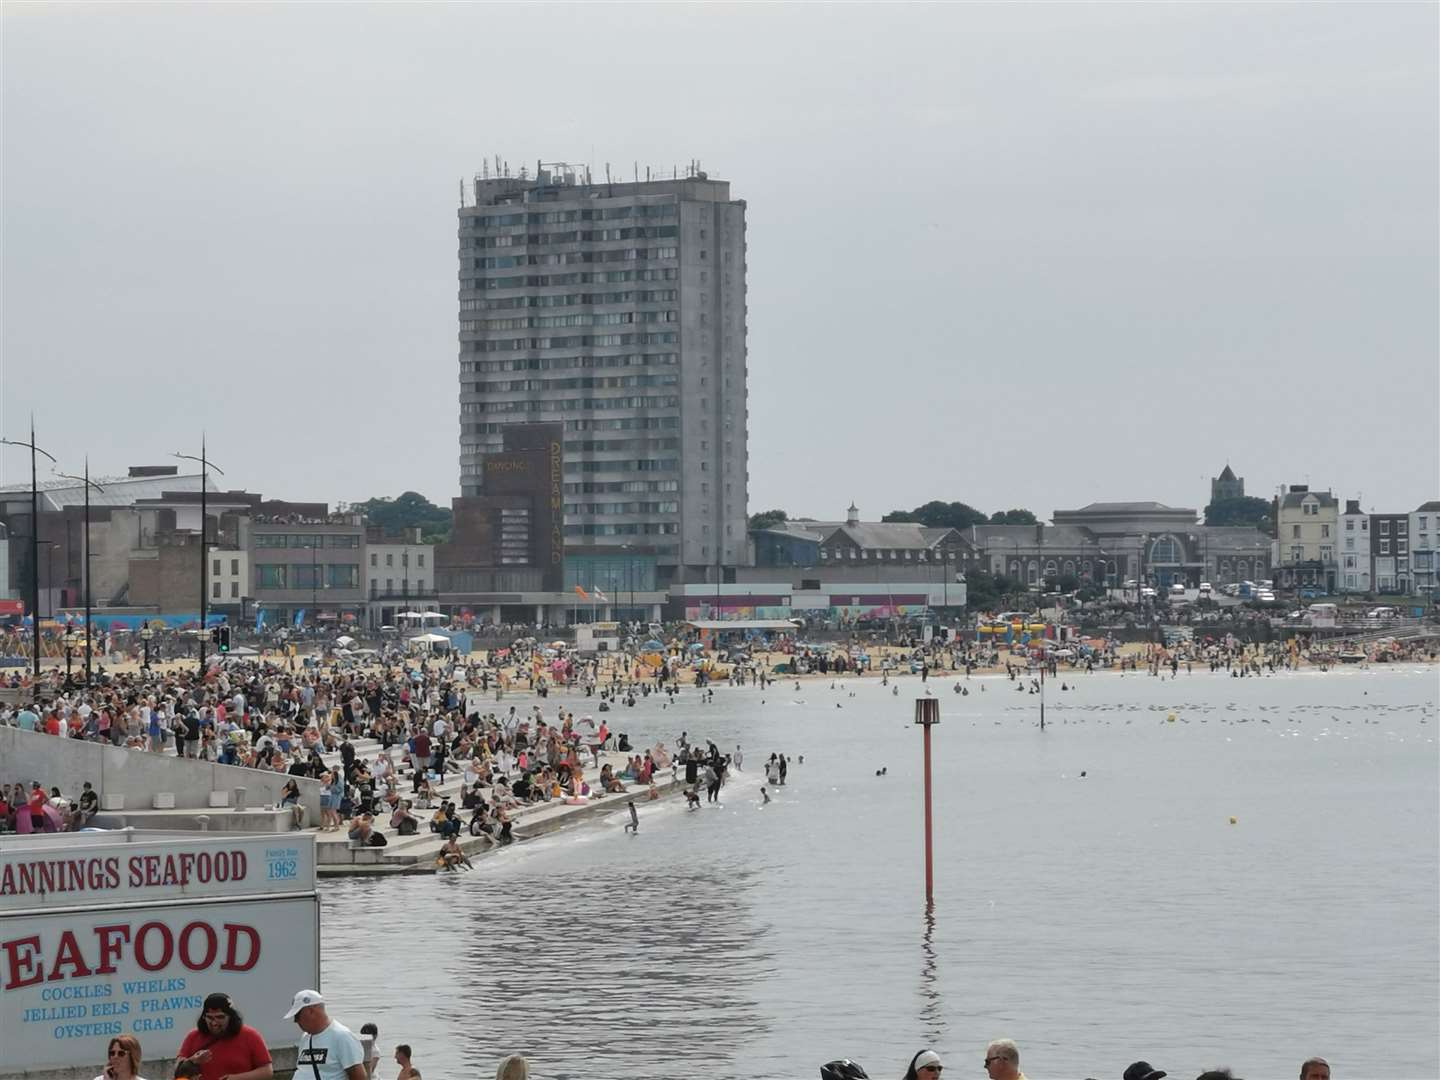 Margate has been ranked as the UK's fourth-worst coastal destination